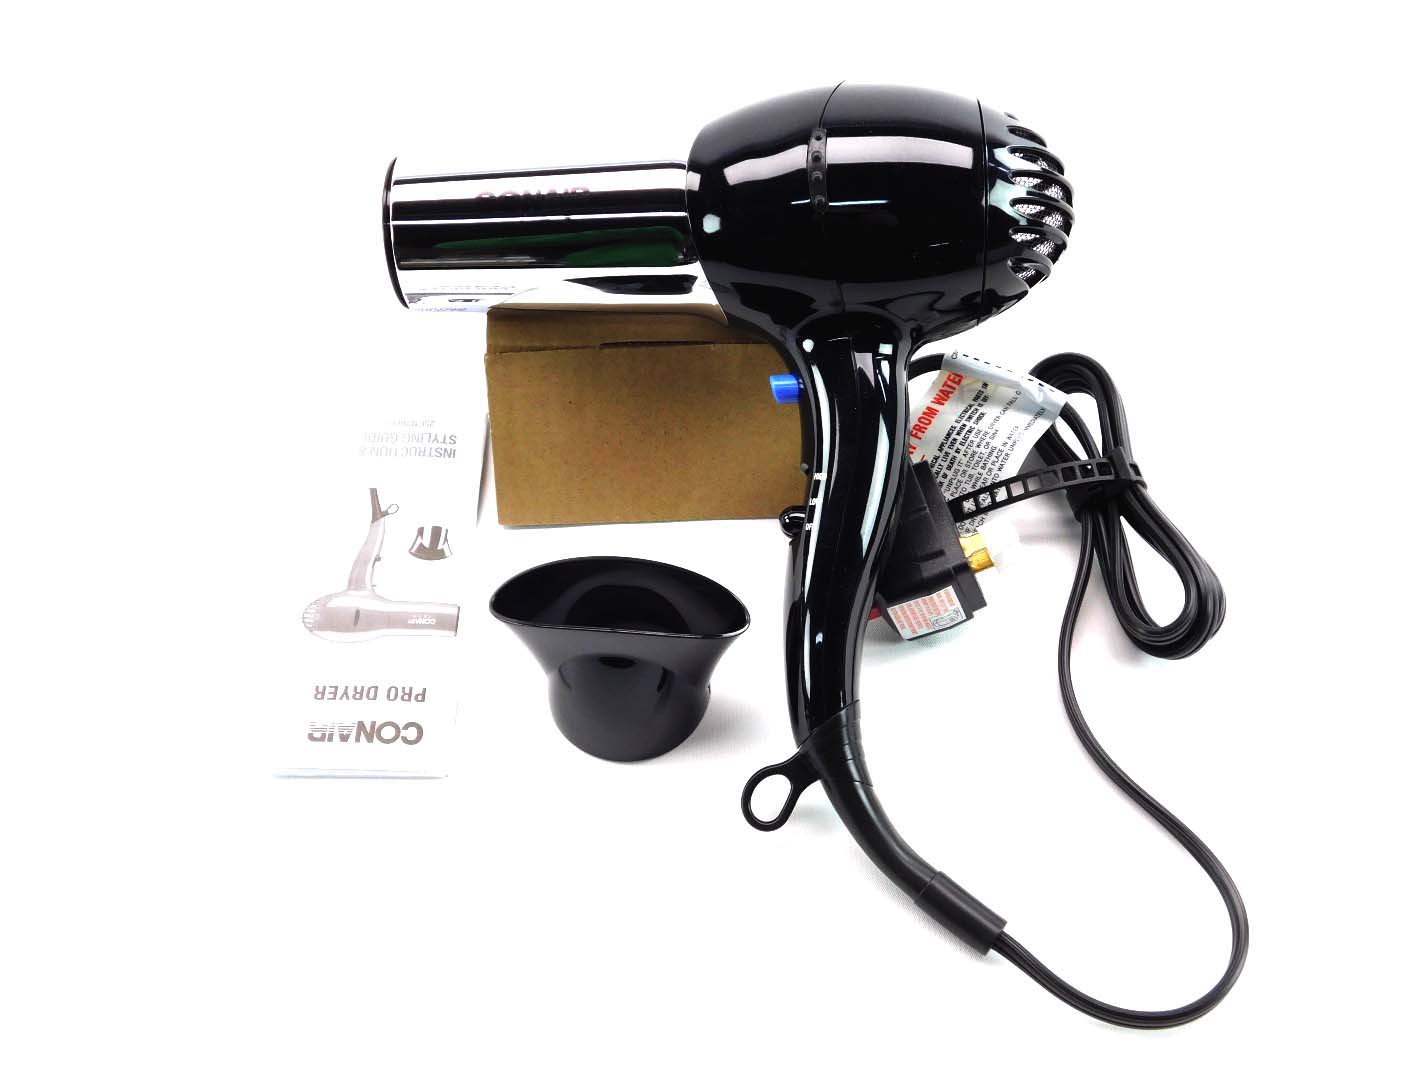 Conair 1875 Watt Full Size Pro Hair Dryer with Ionic Conditioning, Blue/Black - wide 10